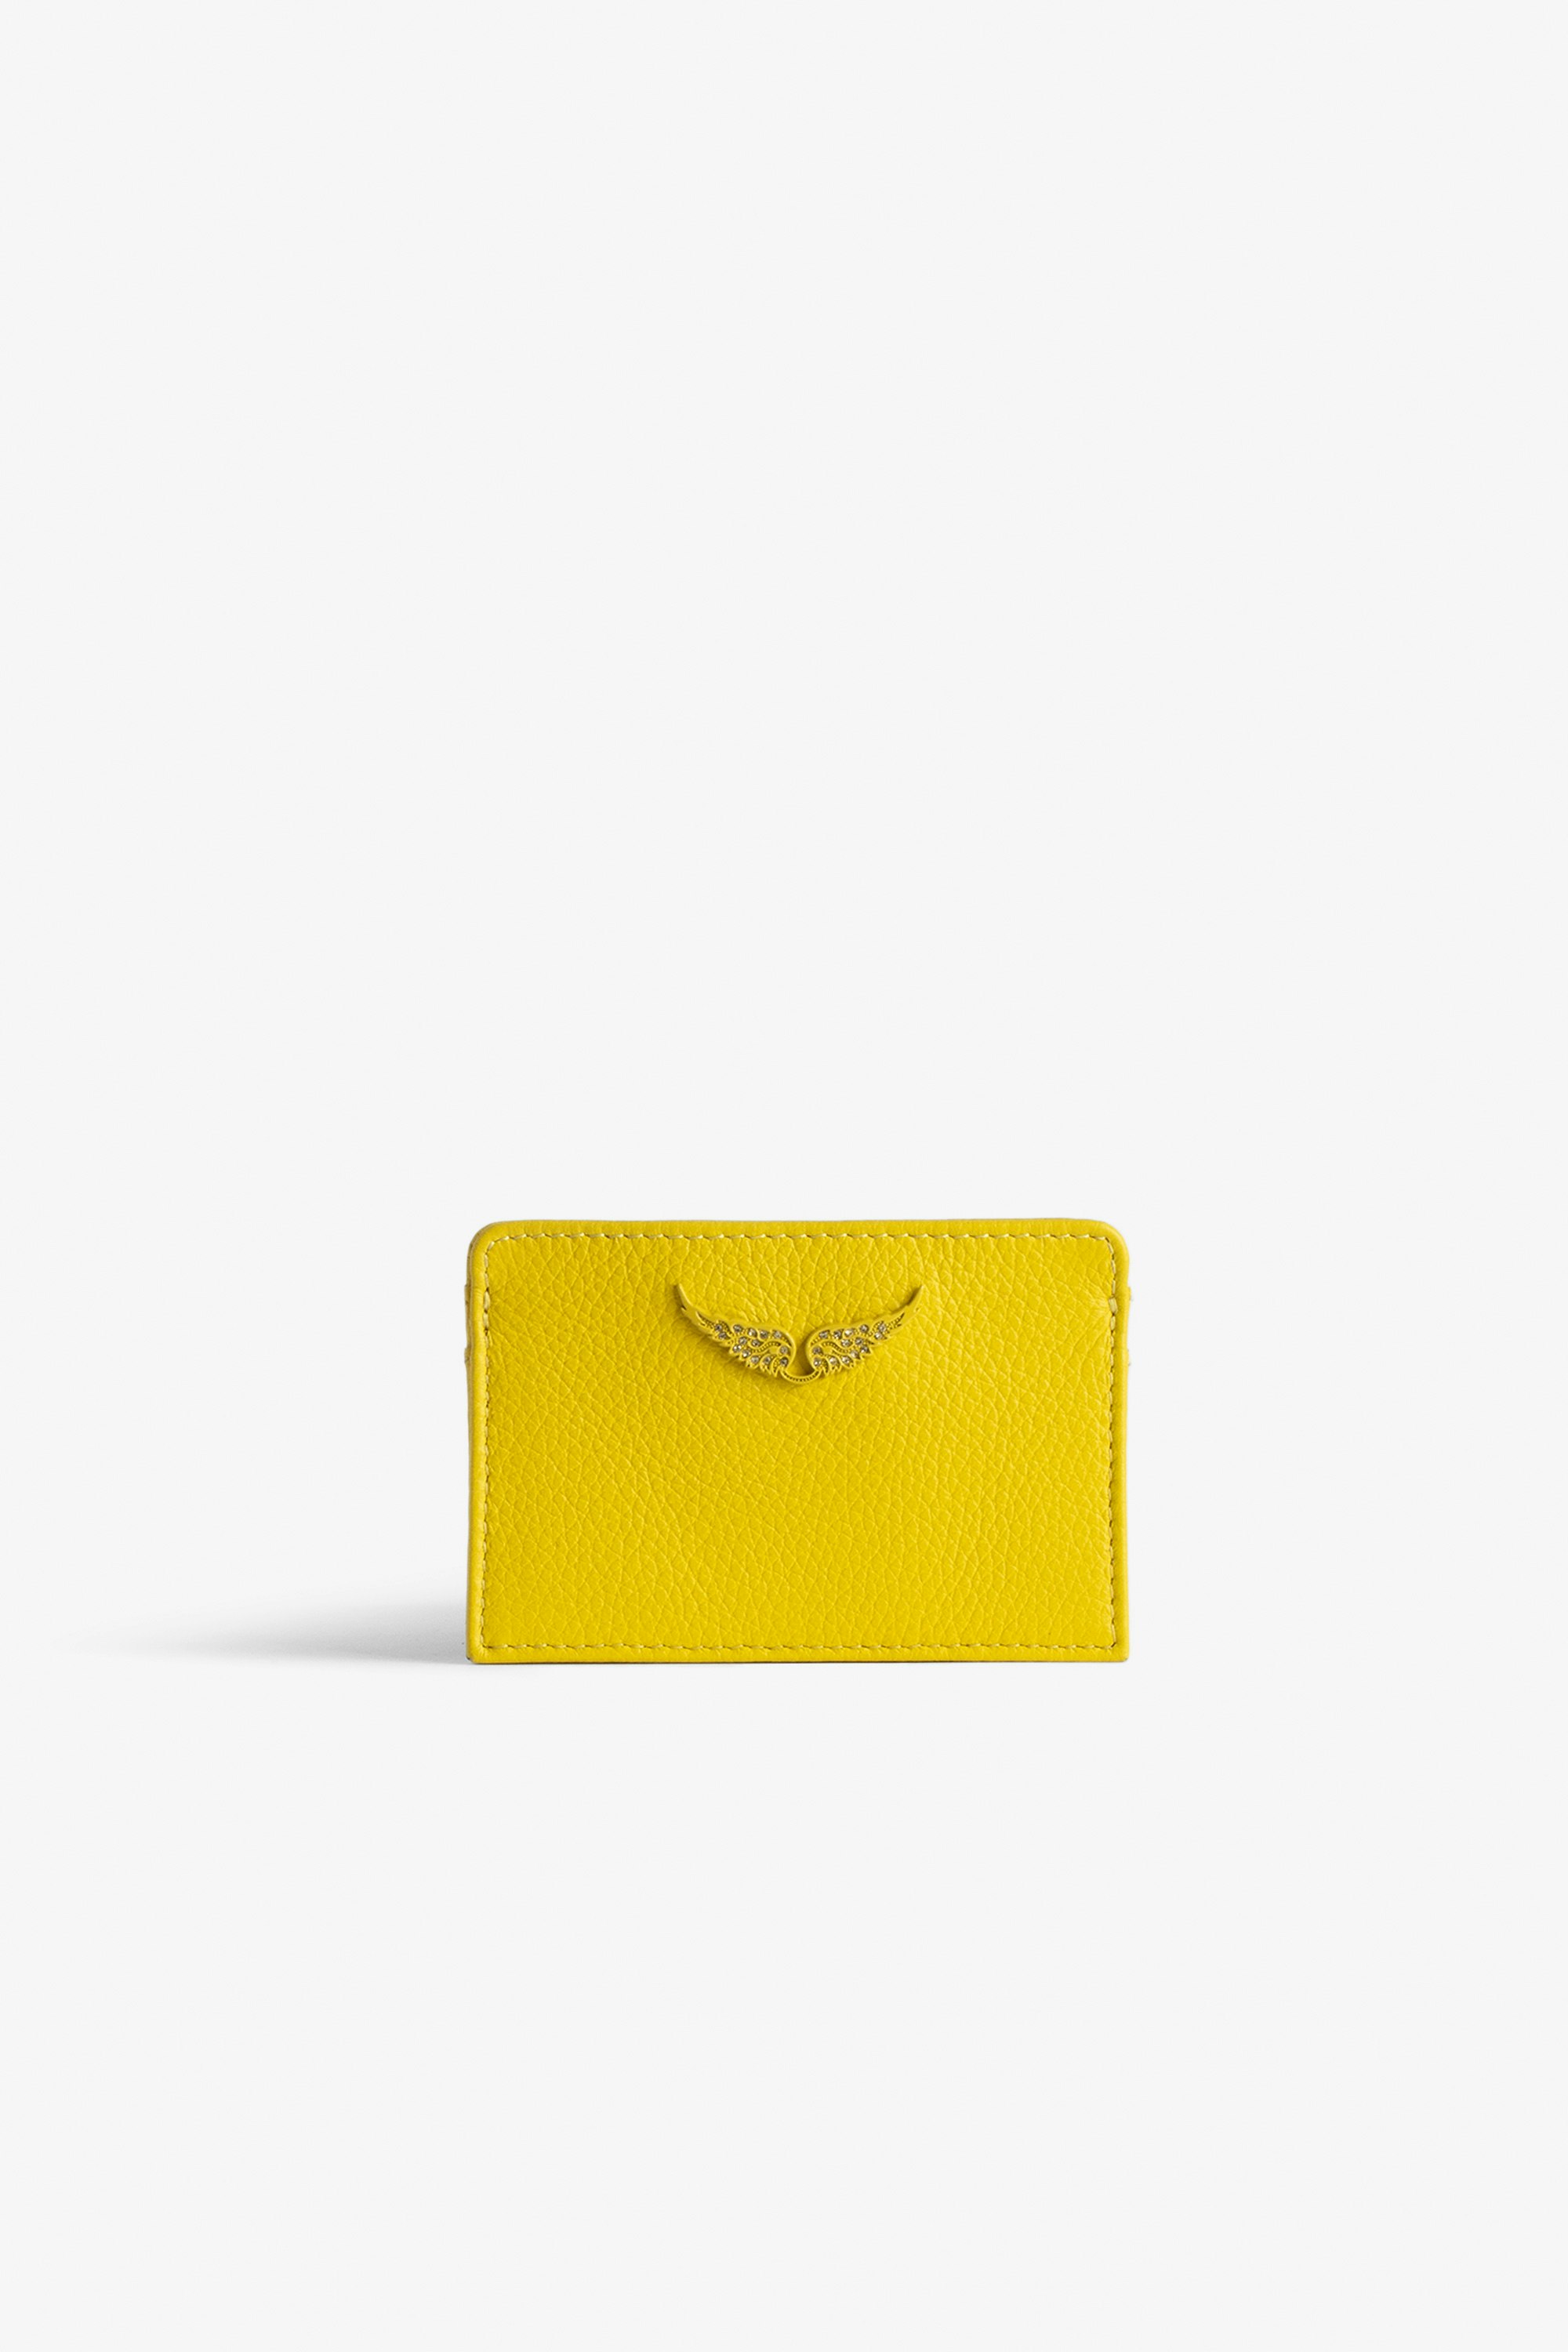 ZV Pass カードホルダー Women’s yellow grained leather card holder with diamanté wings charm.